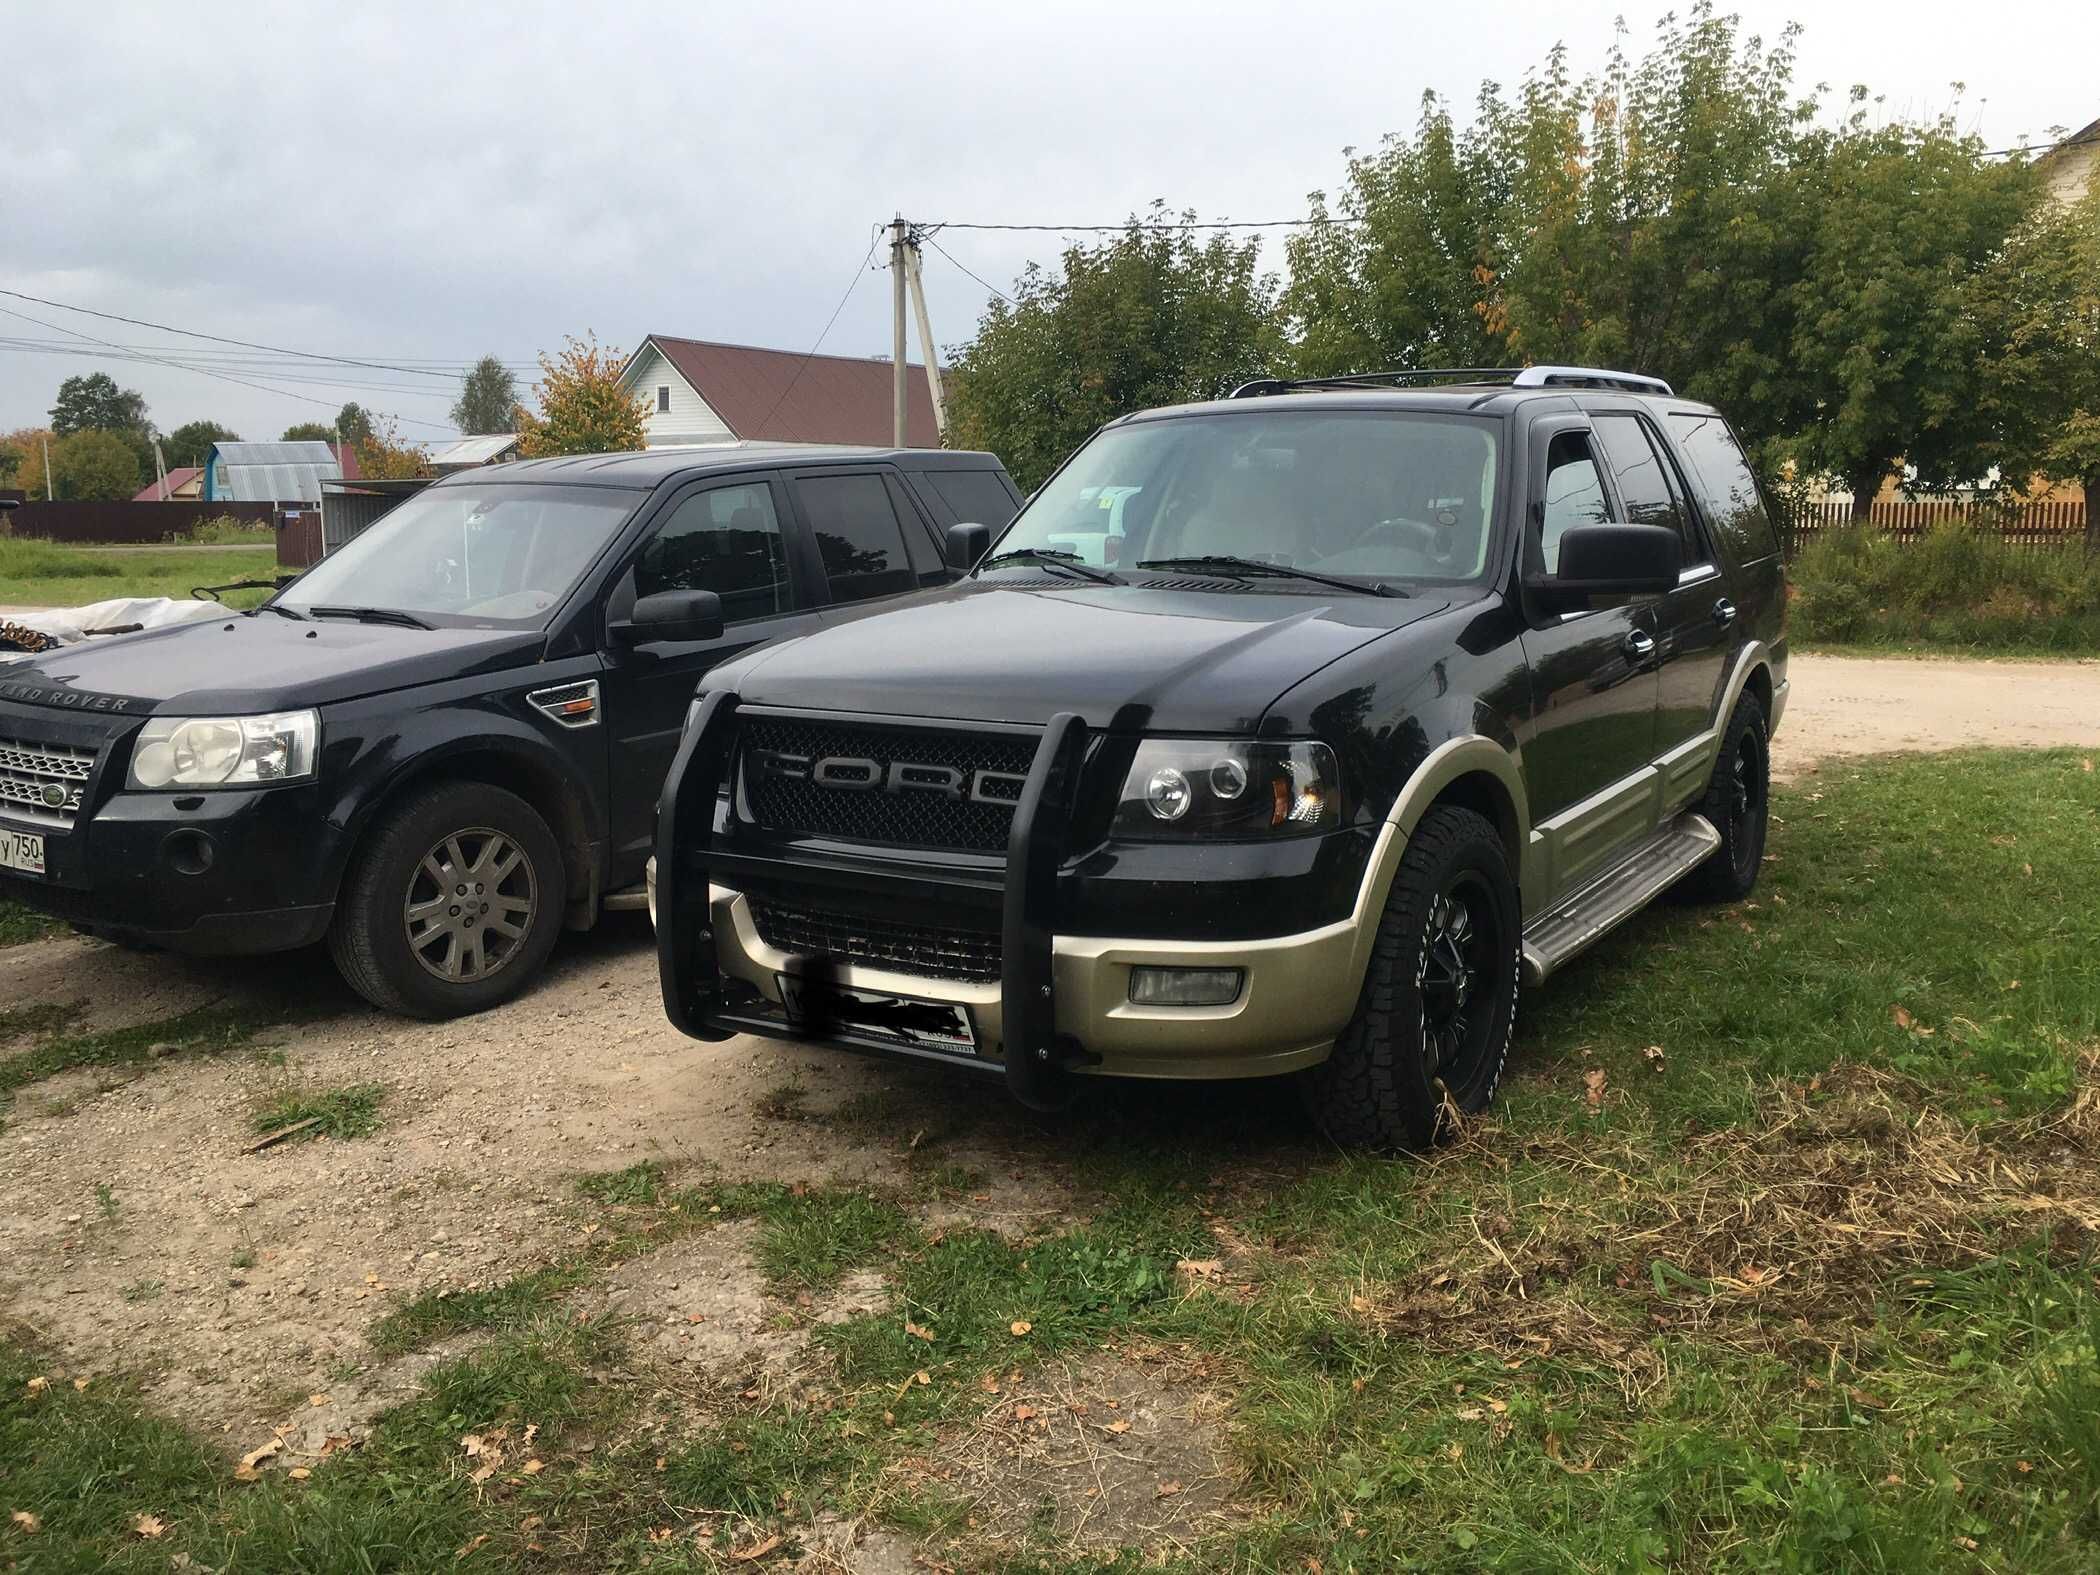 Кенгурятник на Ford Expedition